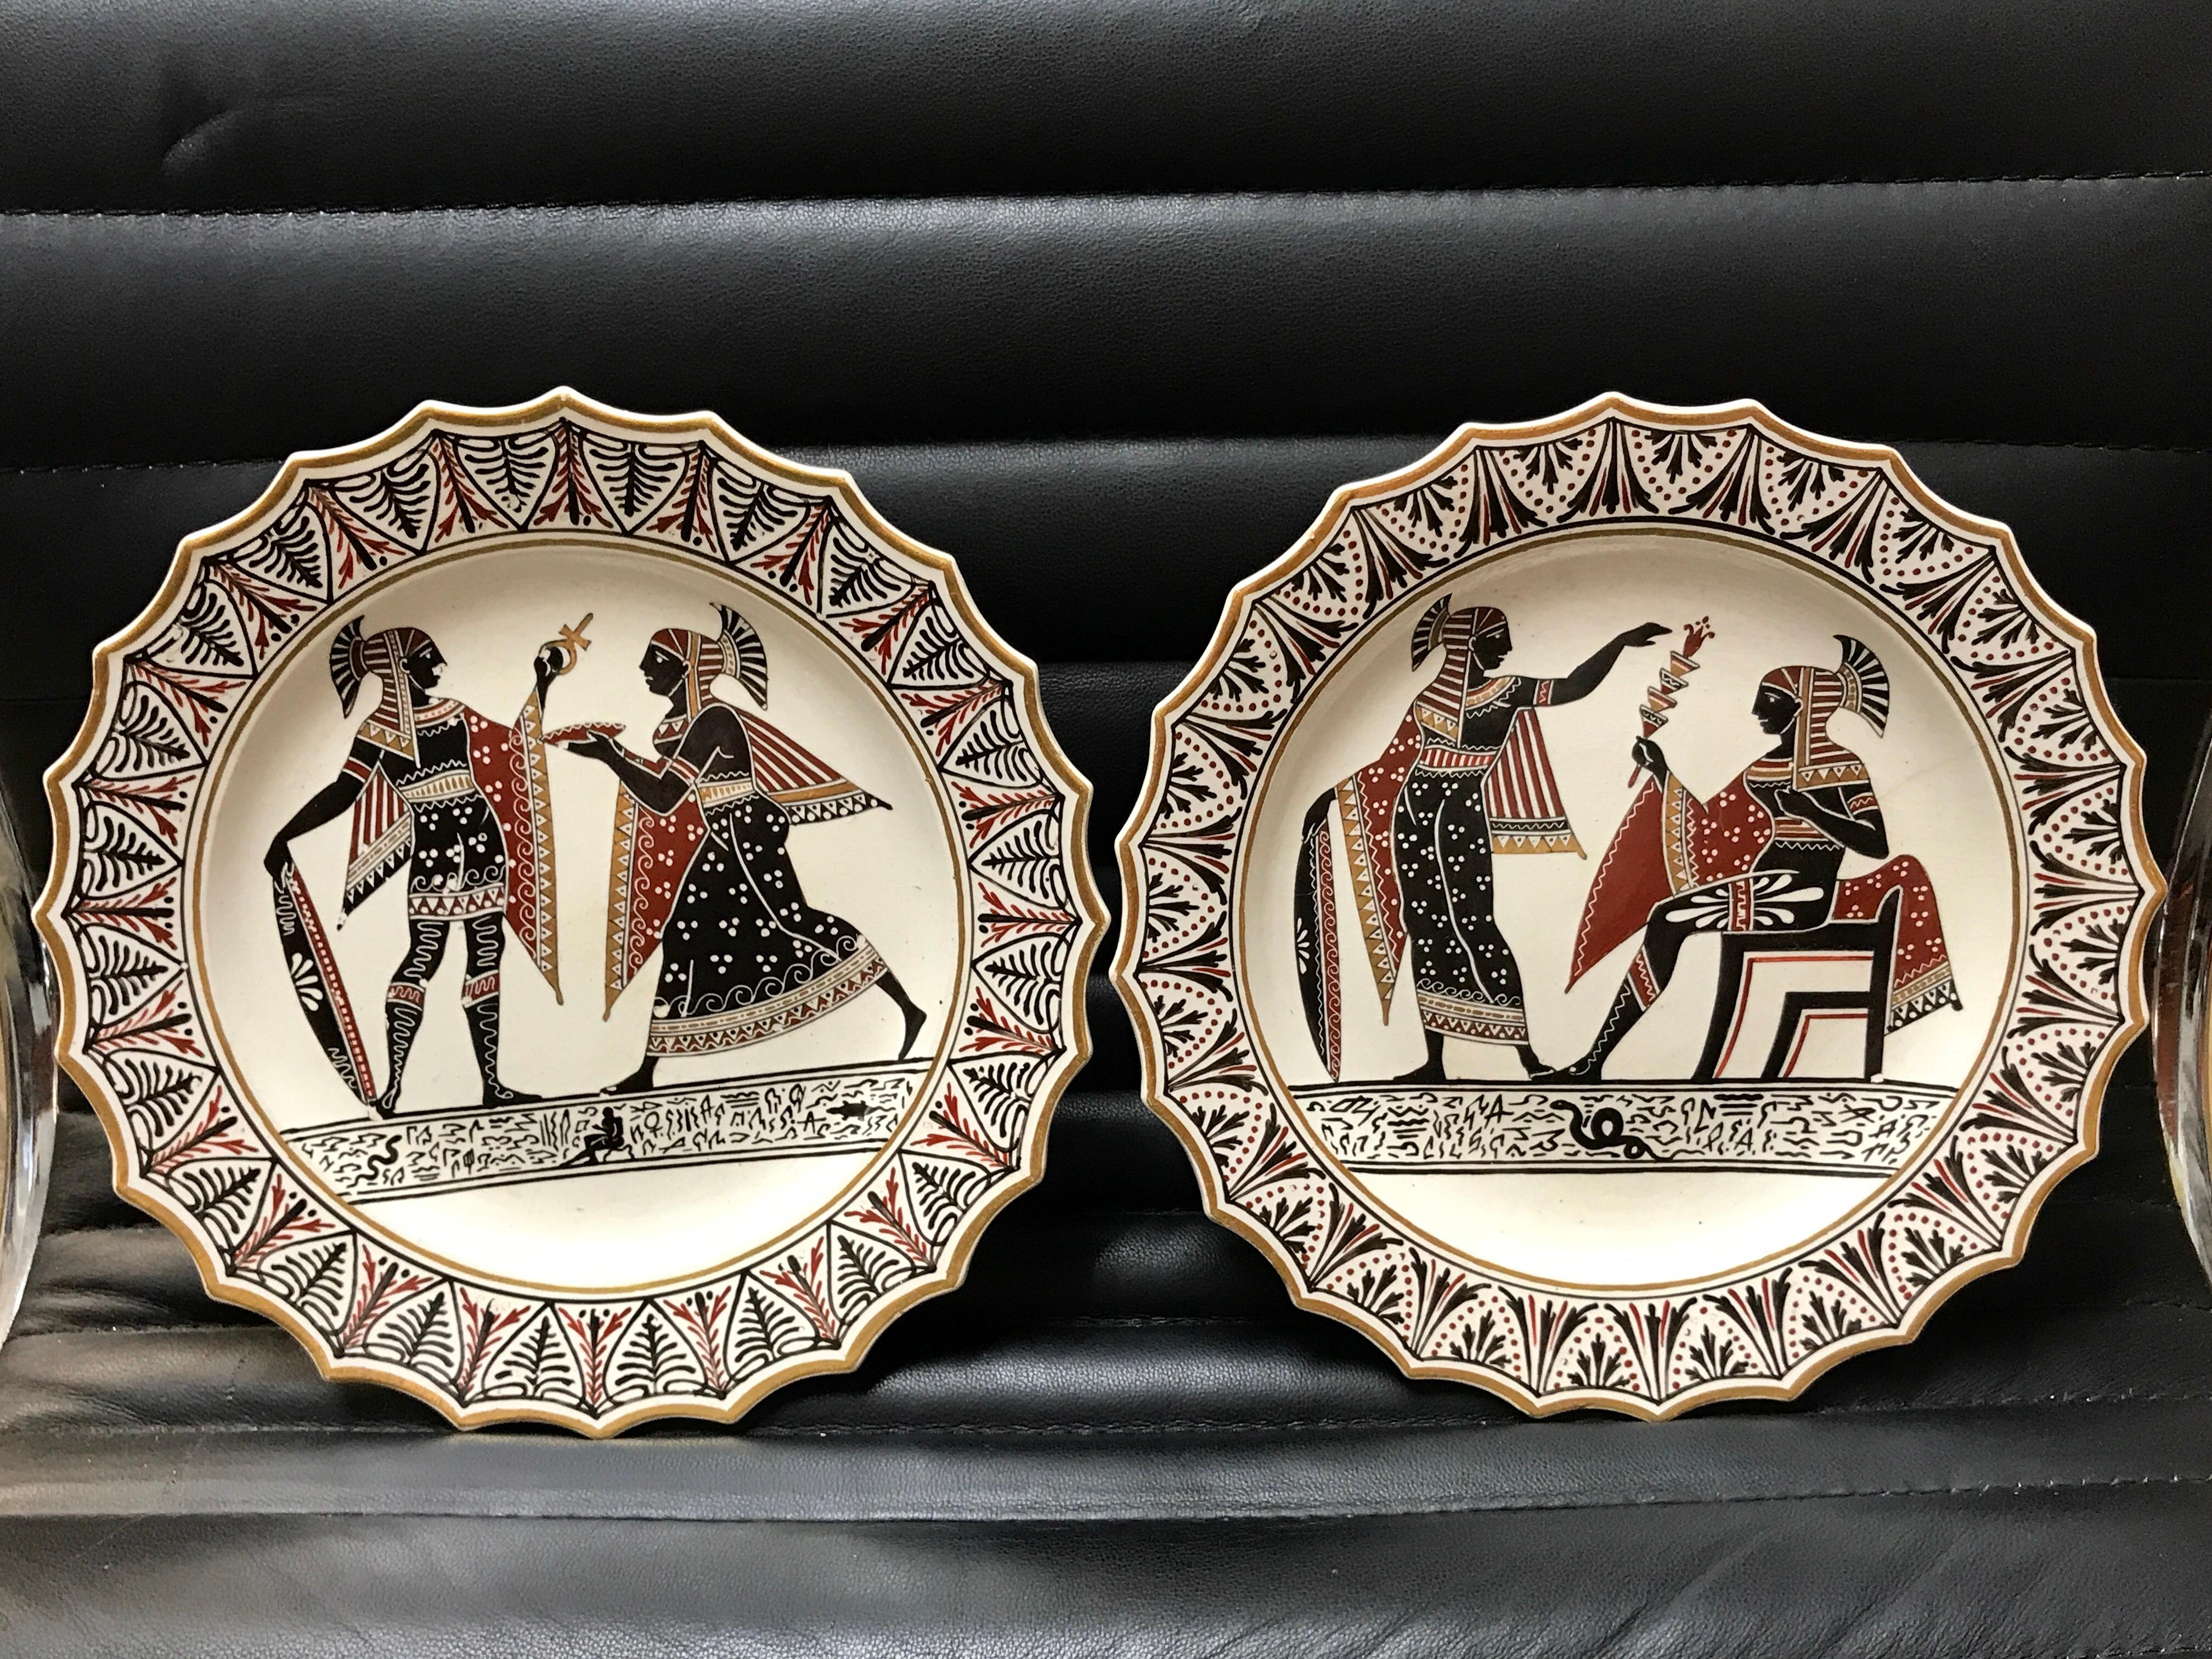 A pair of Giustiniani Egyptomania pottery plates with gilt borders
19th century, impressed script Giustiniani, and other characters.